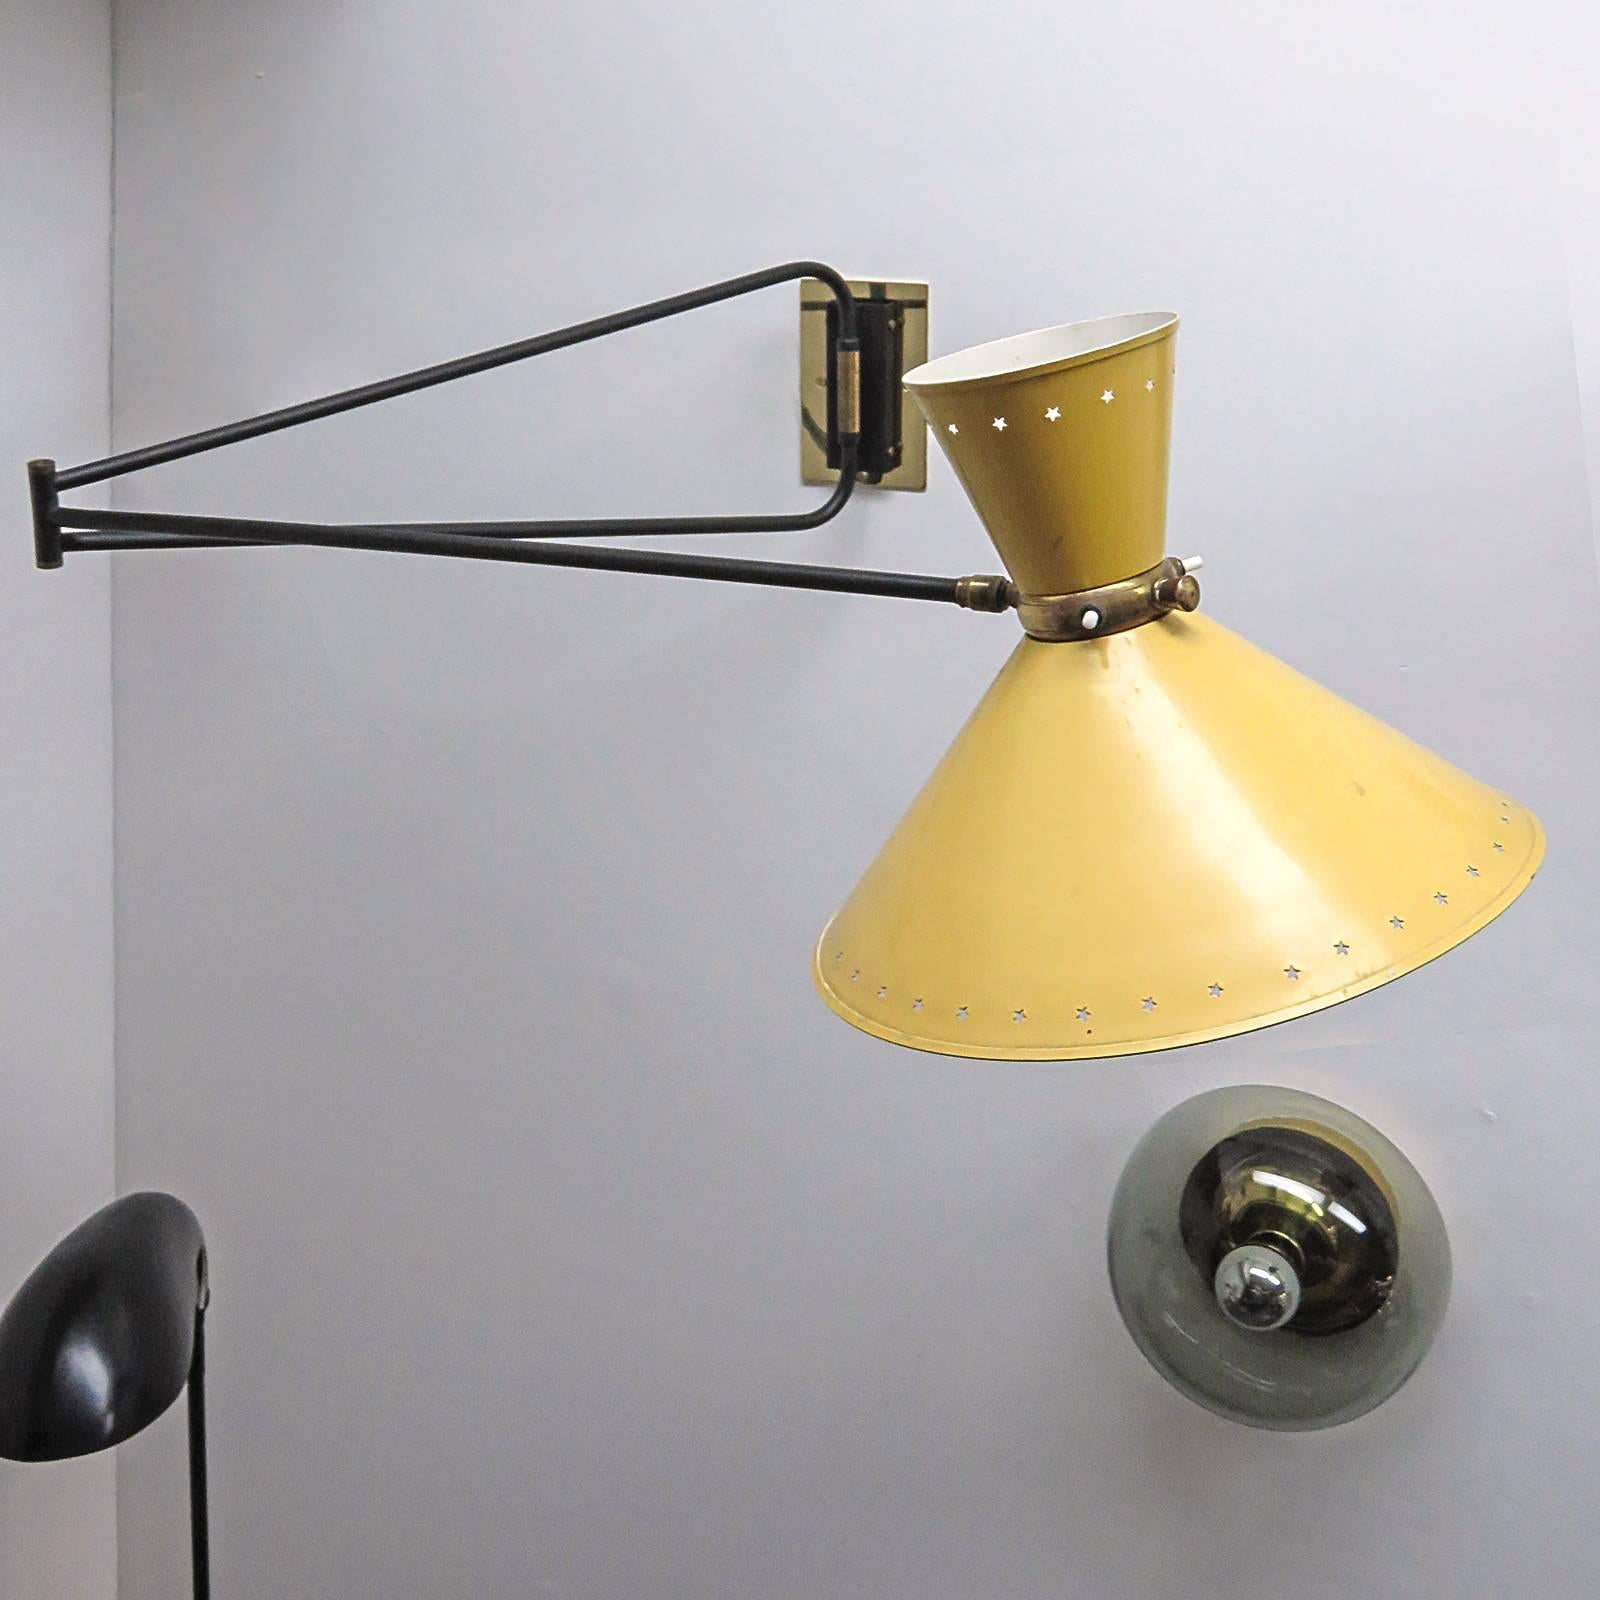 Mid-20th Century French Swing Arm Wall Light by Rene Mathieu for Lunel, 1950s